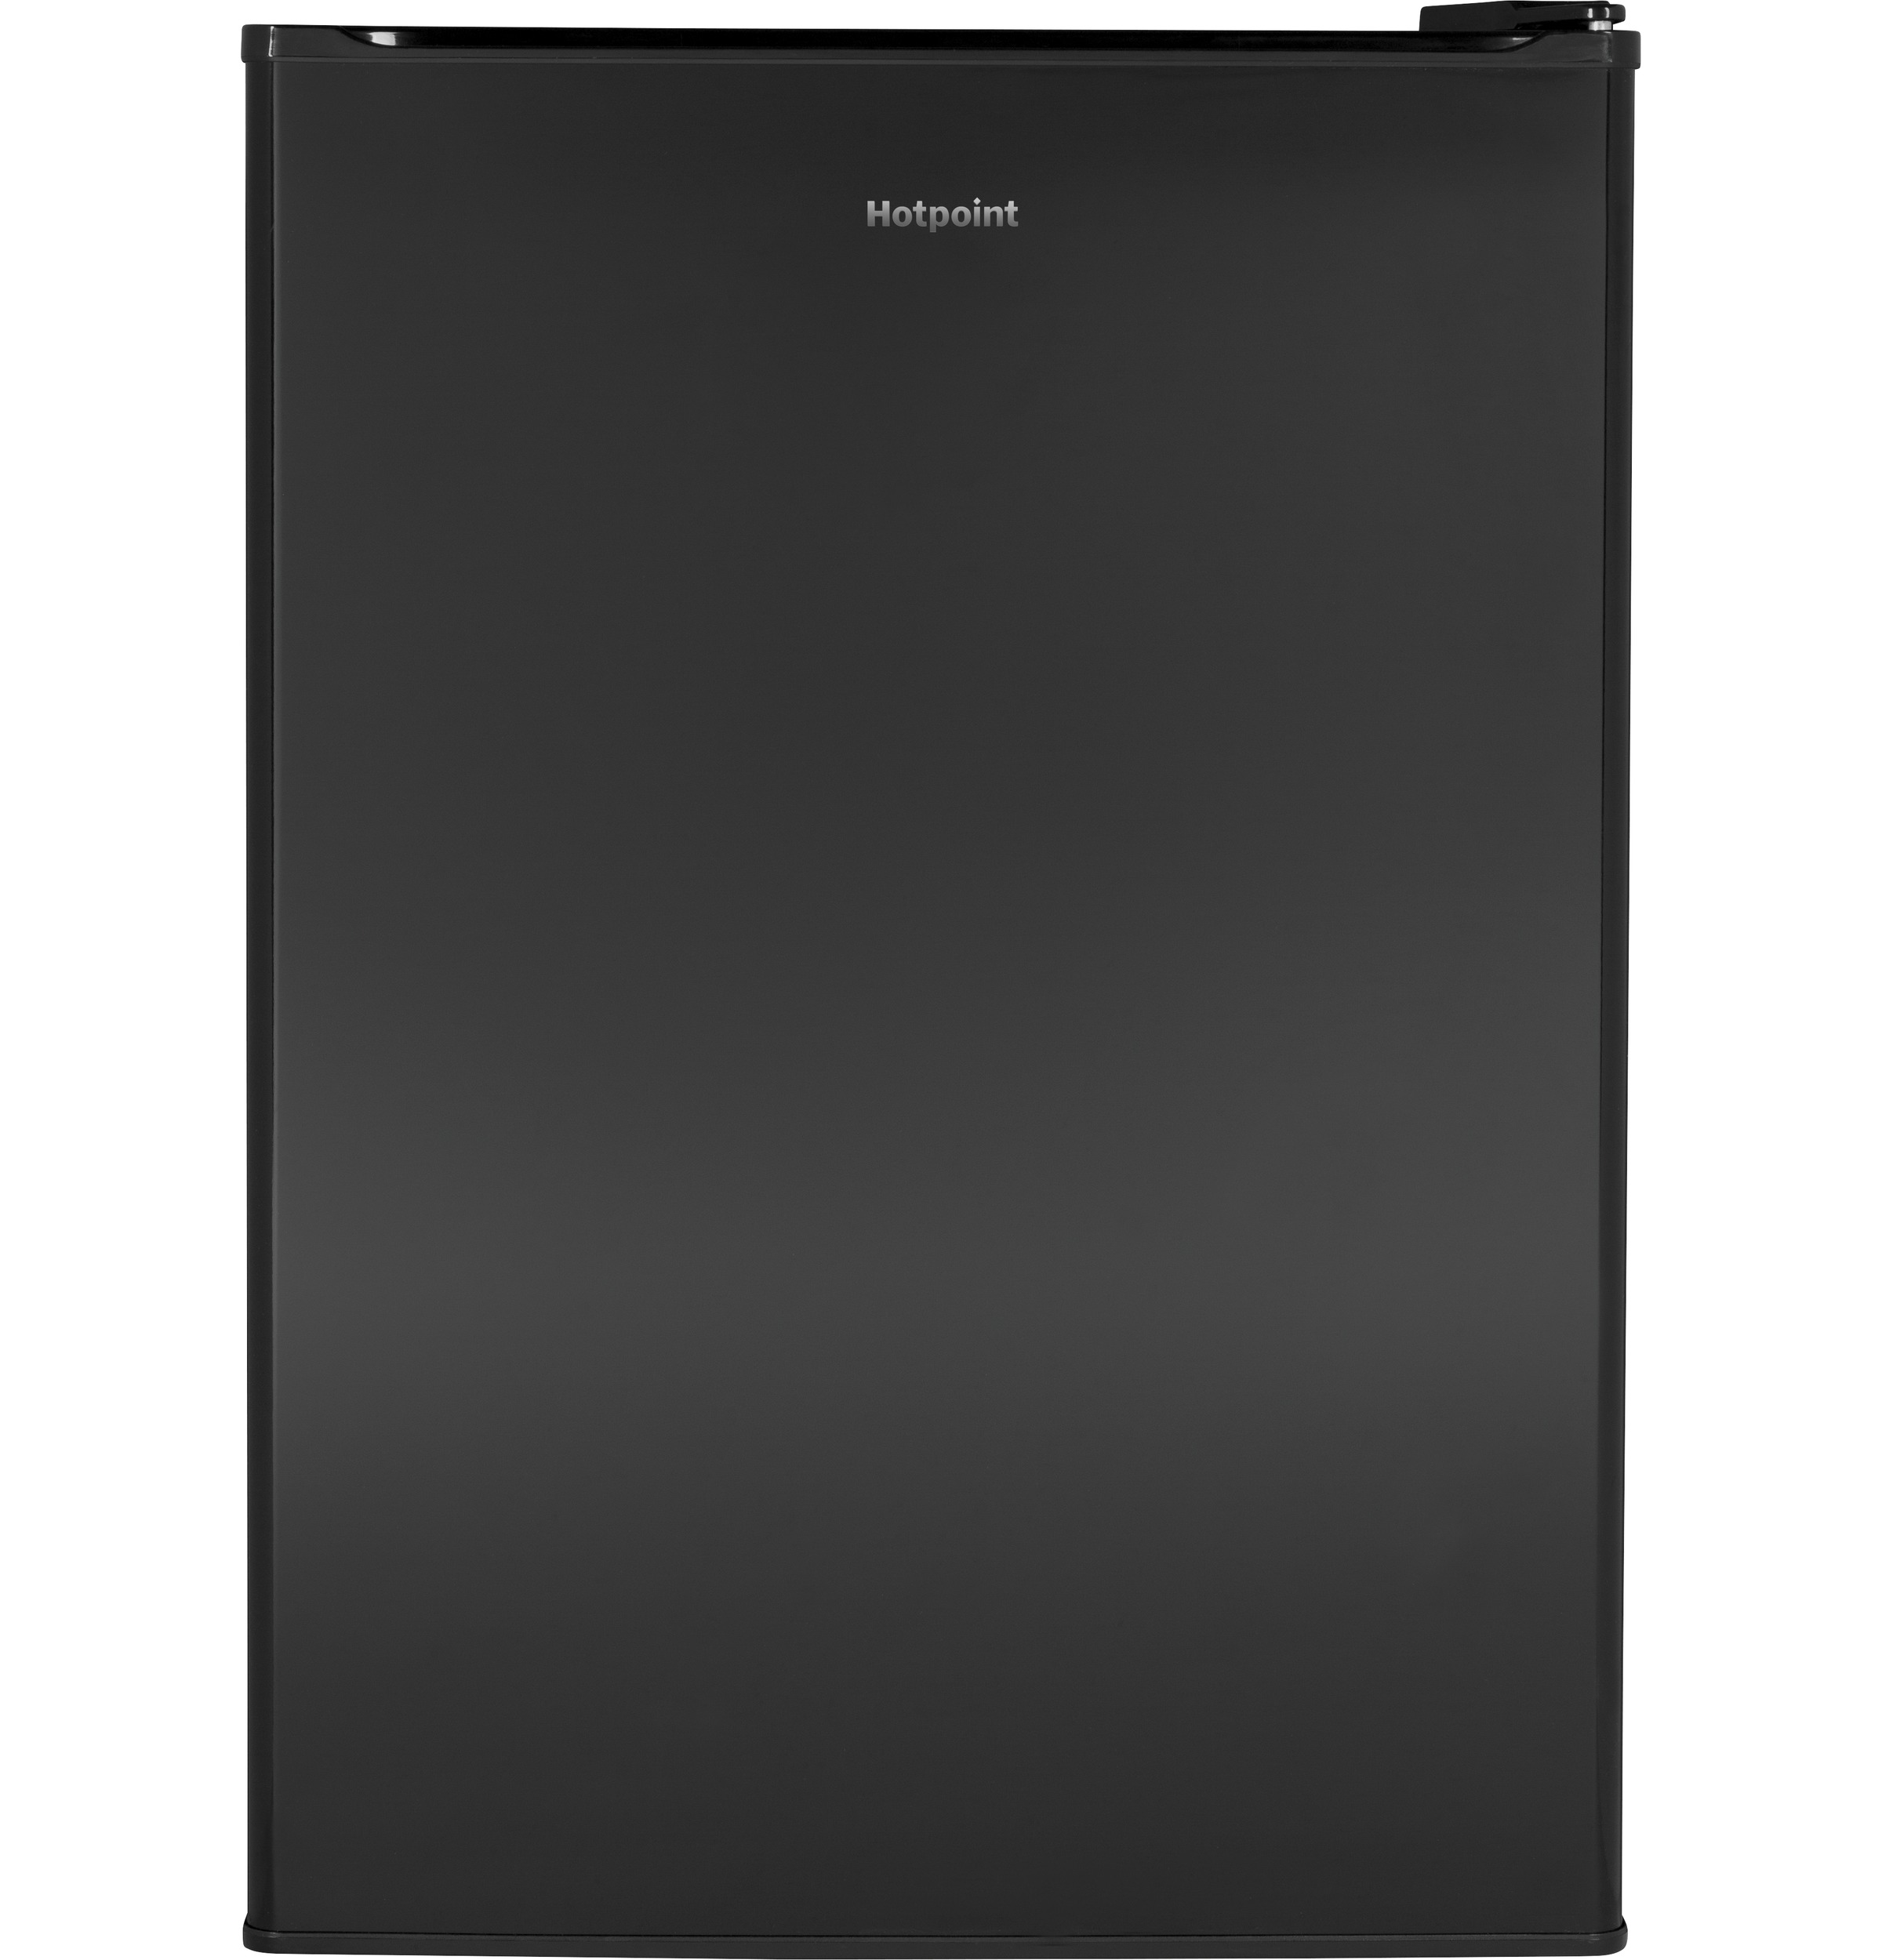 Hotpoint® ENERGY STAR® 2.7 cu. ft. Compact Refrigerator